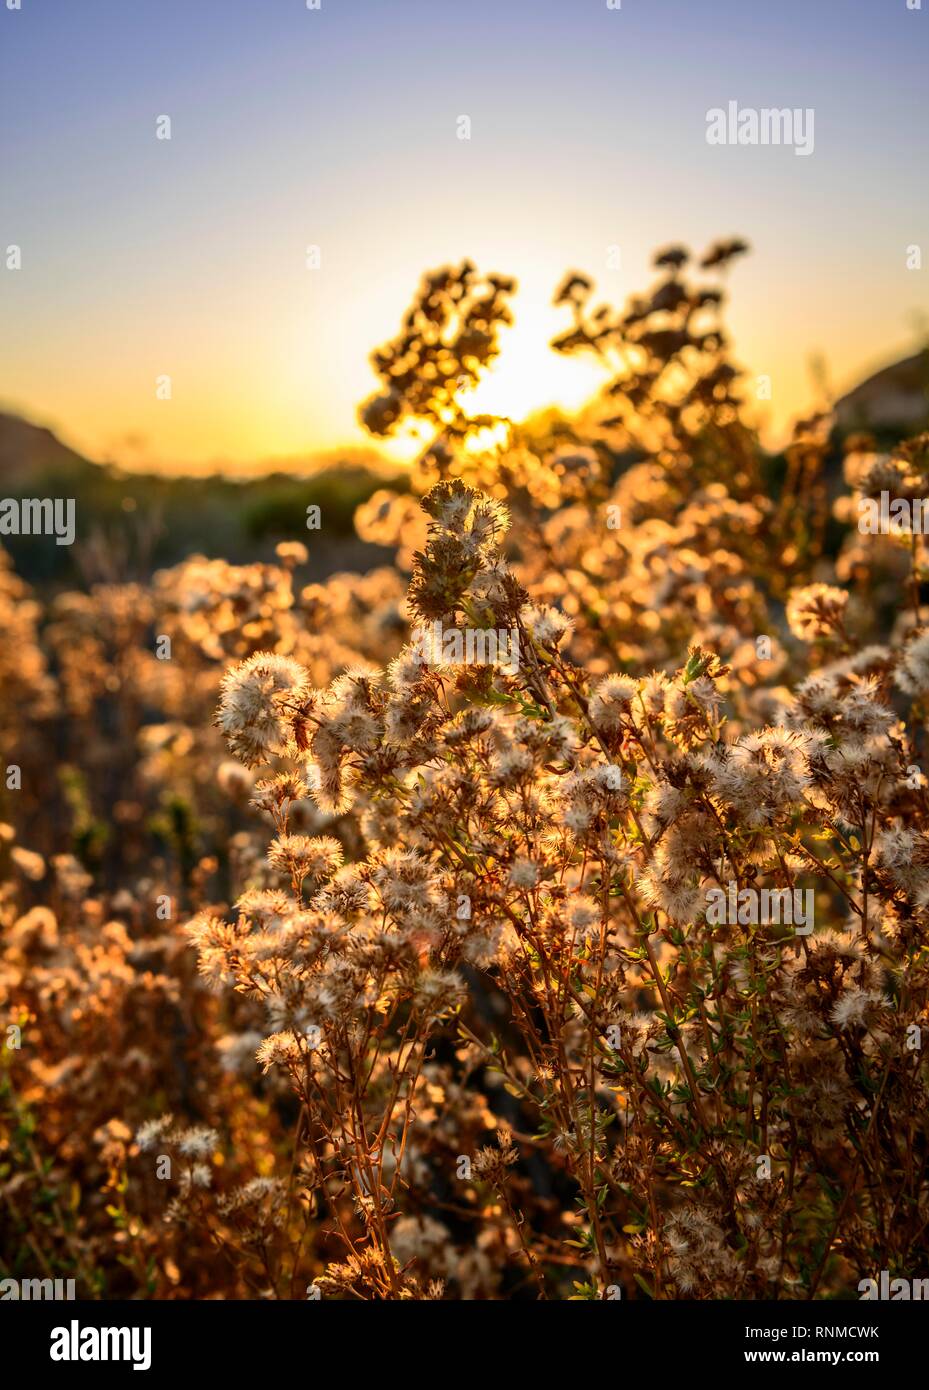 Flowering plants and grasses in back light, sunset, Crystal Cove State Park, Orange County, California, USA Stock Photo